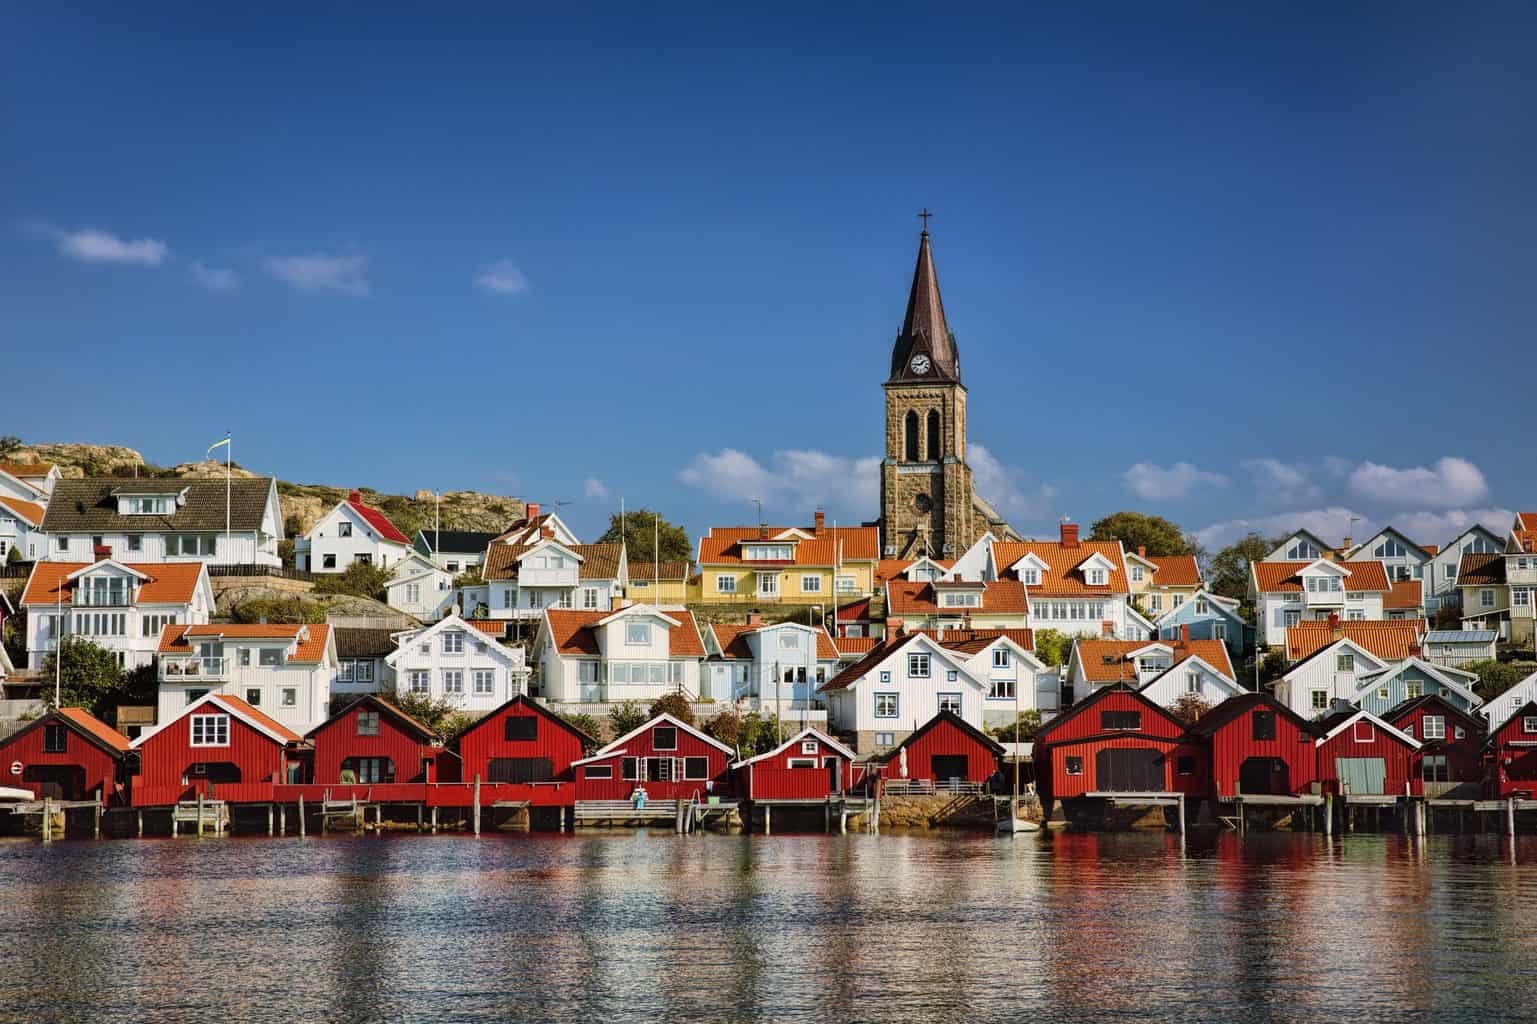 15 of the most beautiful villages in Europe for travel snobs | Boutique